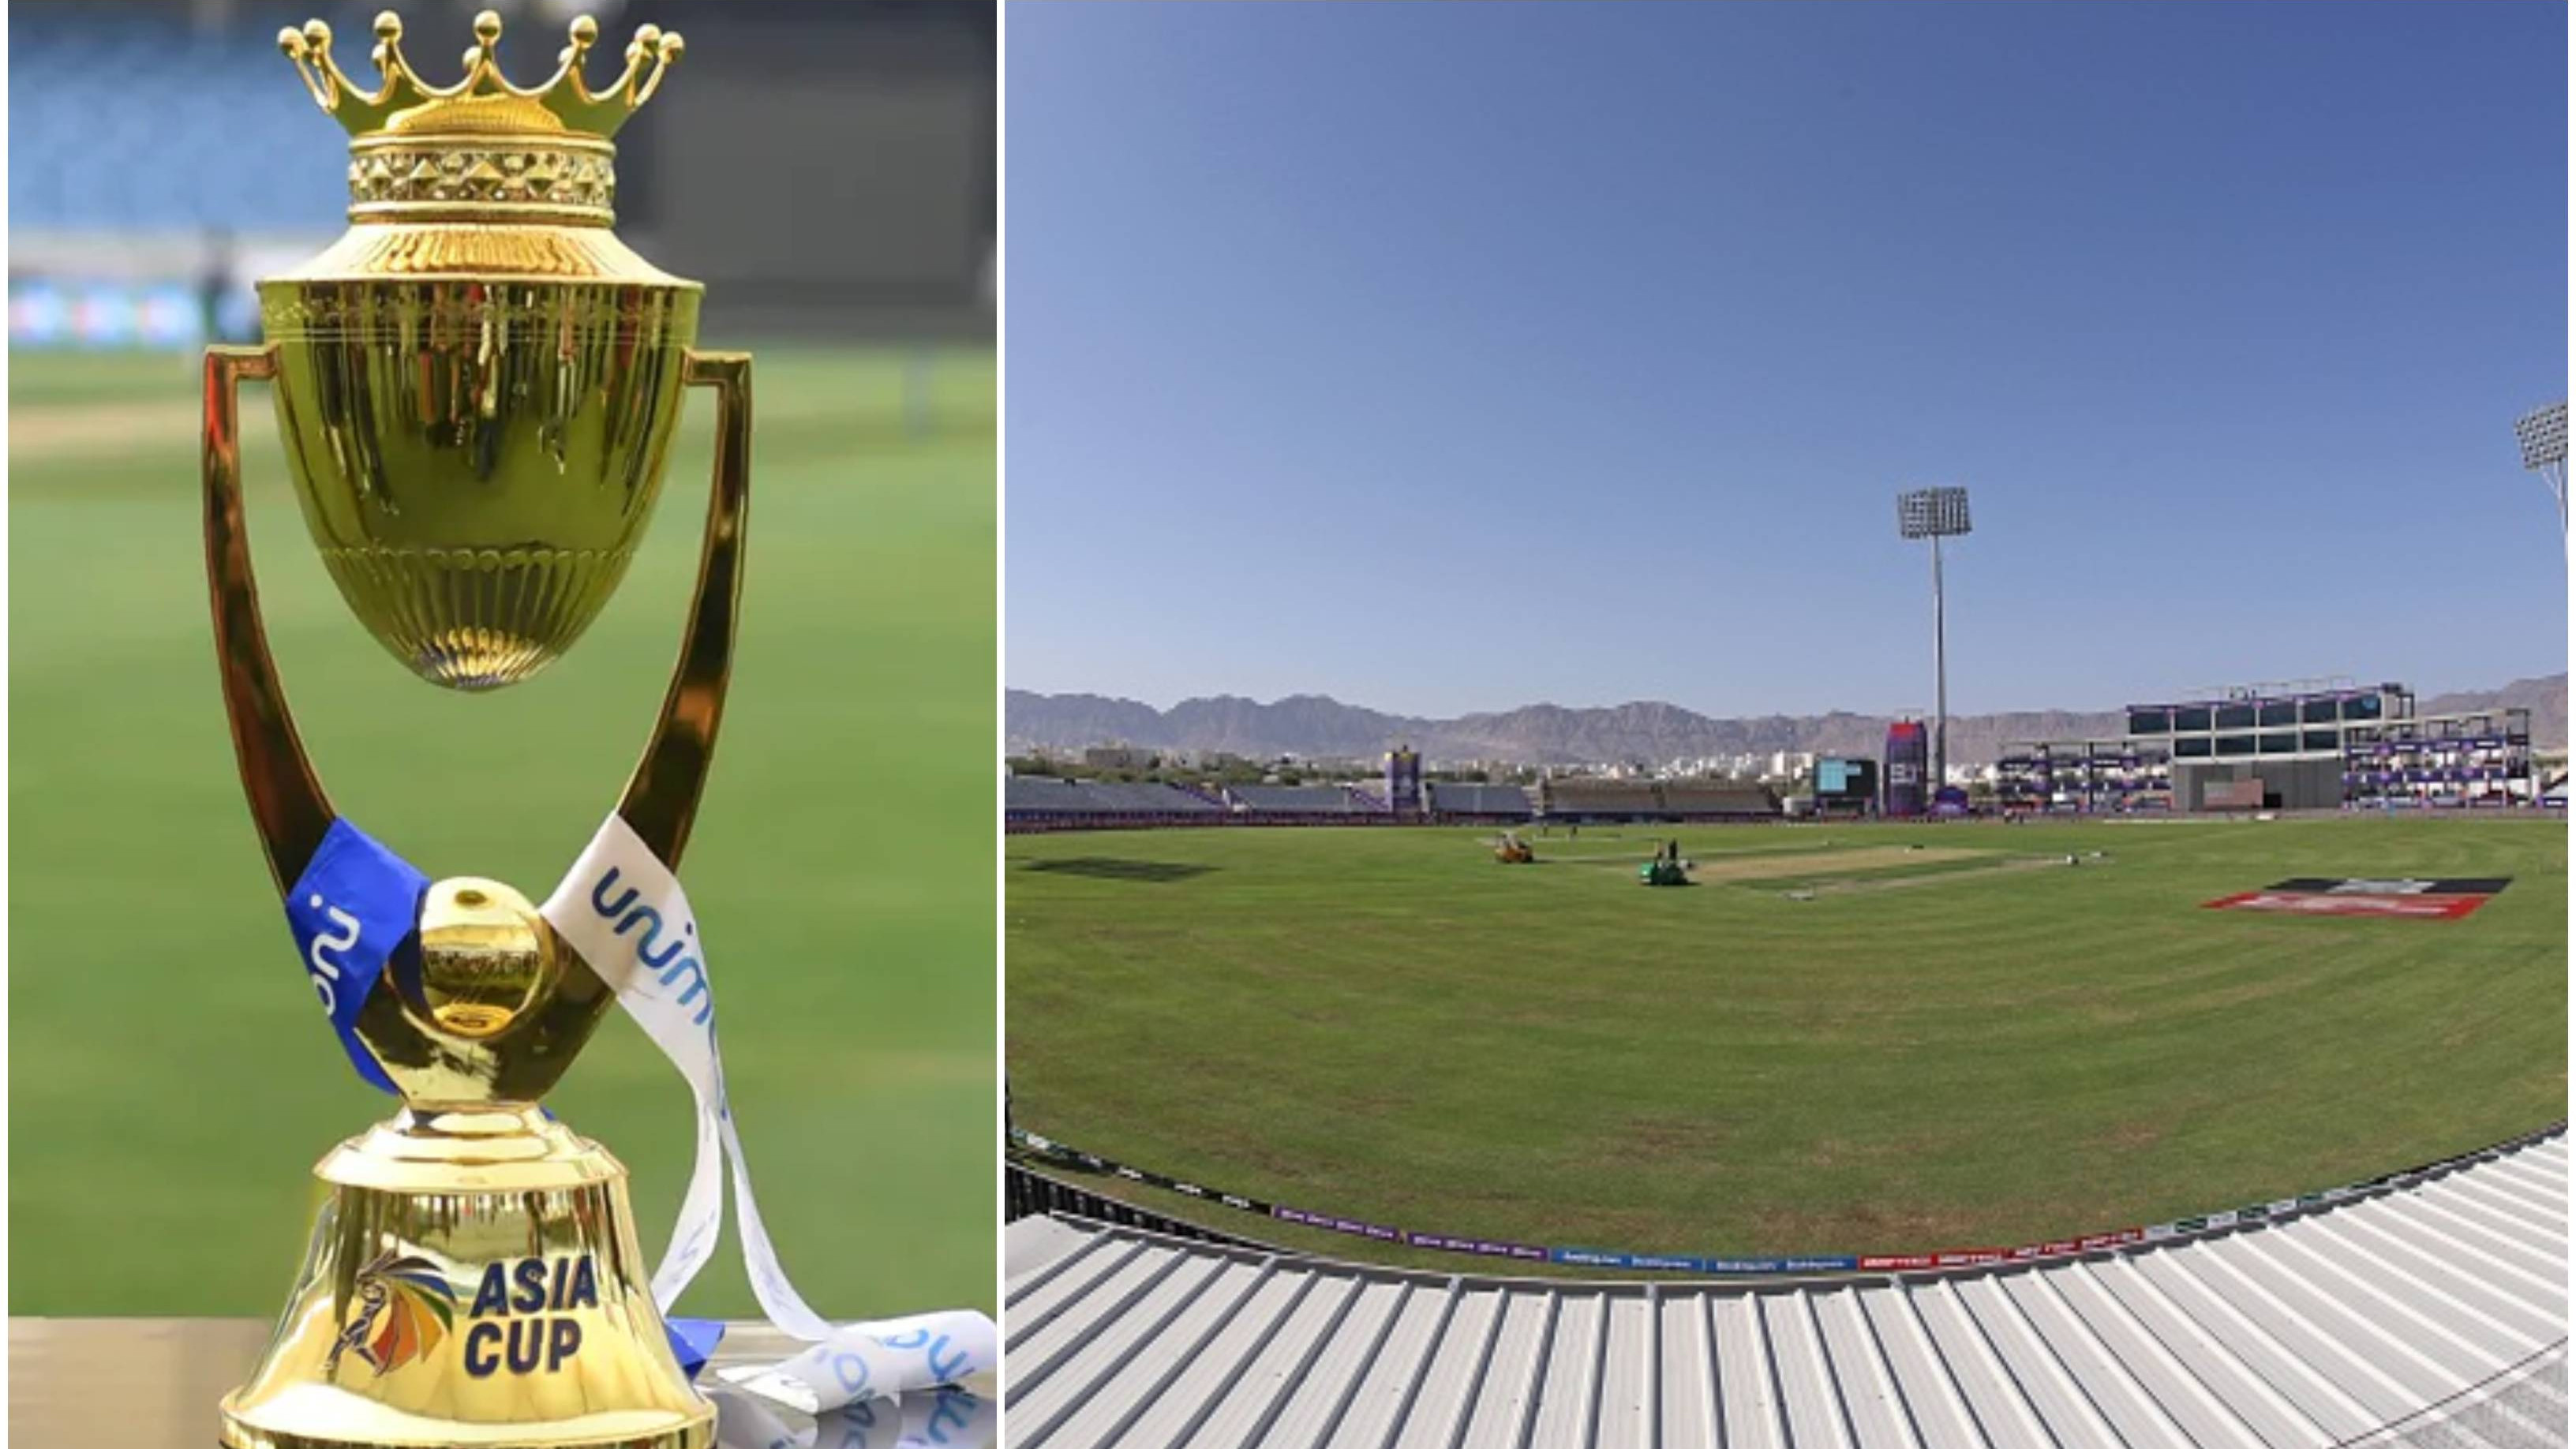 Asia Cup 2022: Oman to host Asia Cup qualifiers from August 20, confirms ACC